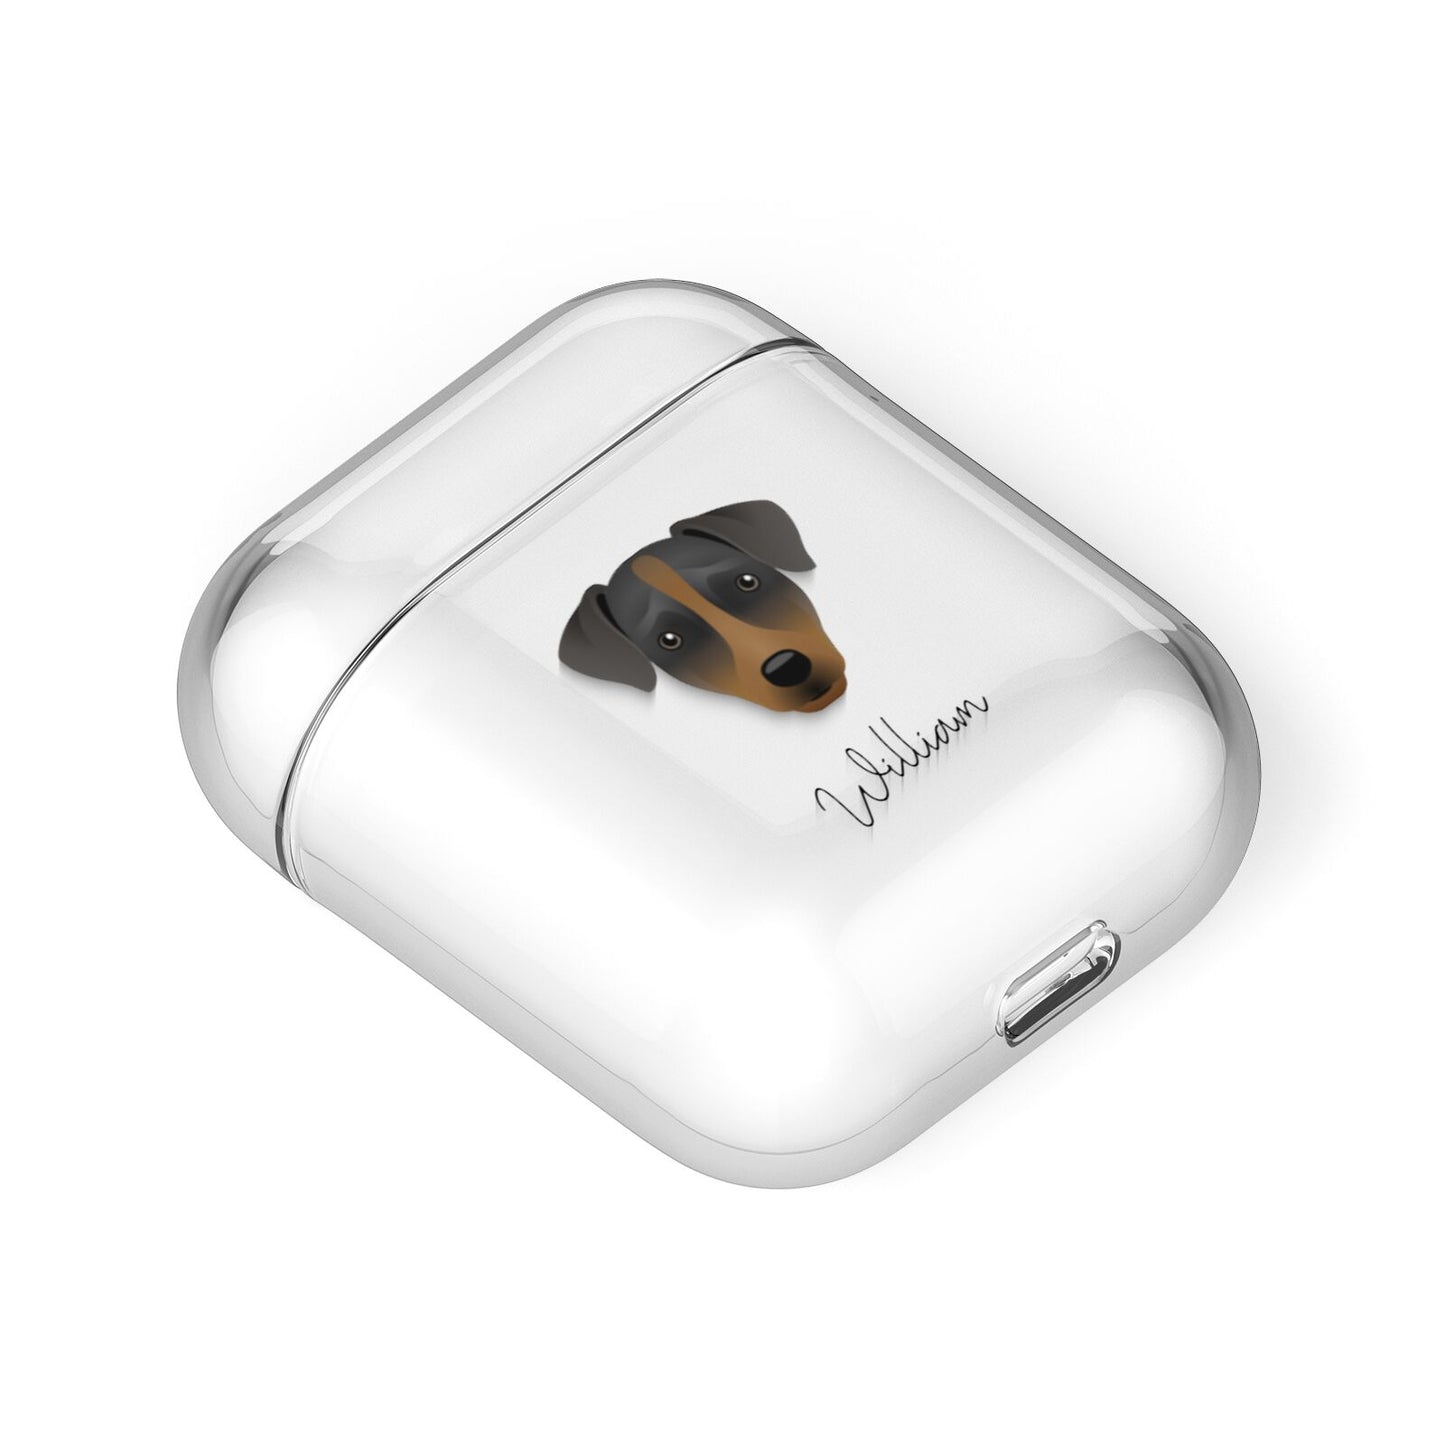 Patterdale Terrier Personalised AirPods Case Laid Flat